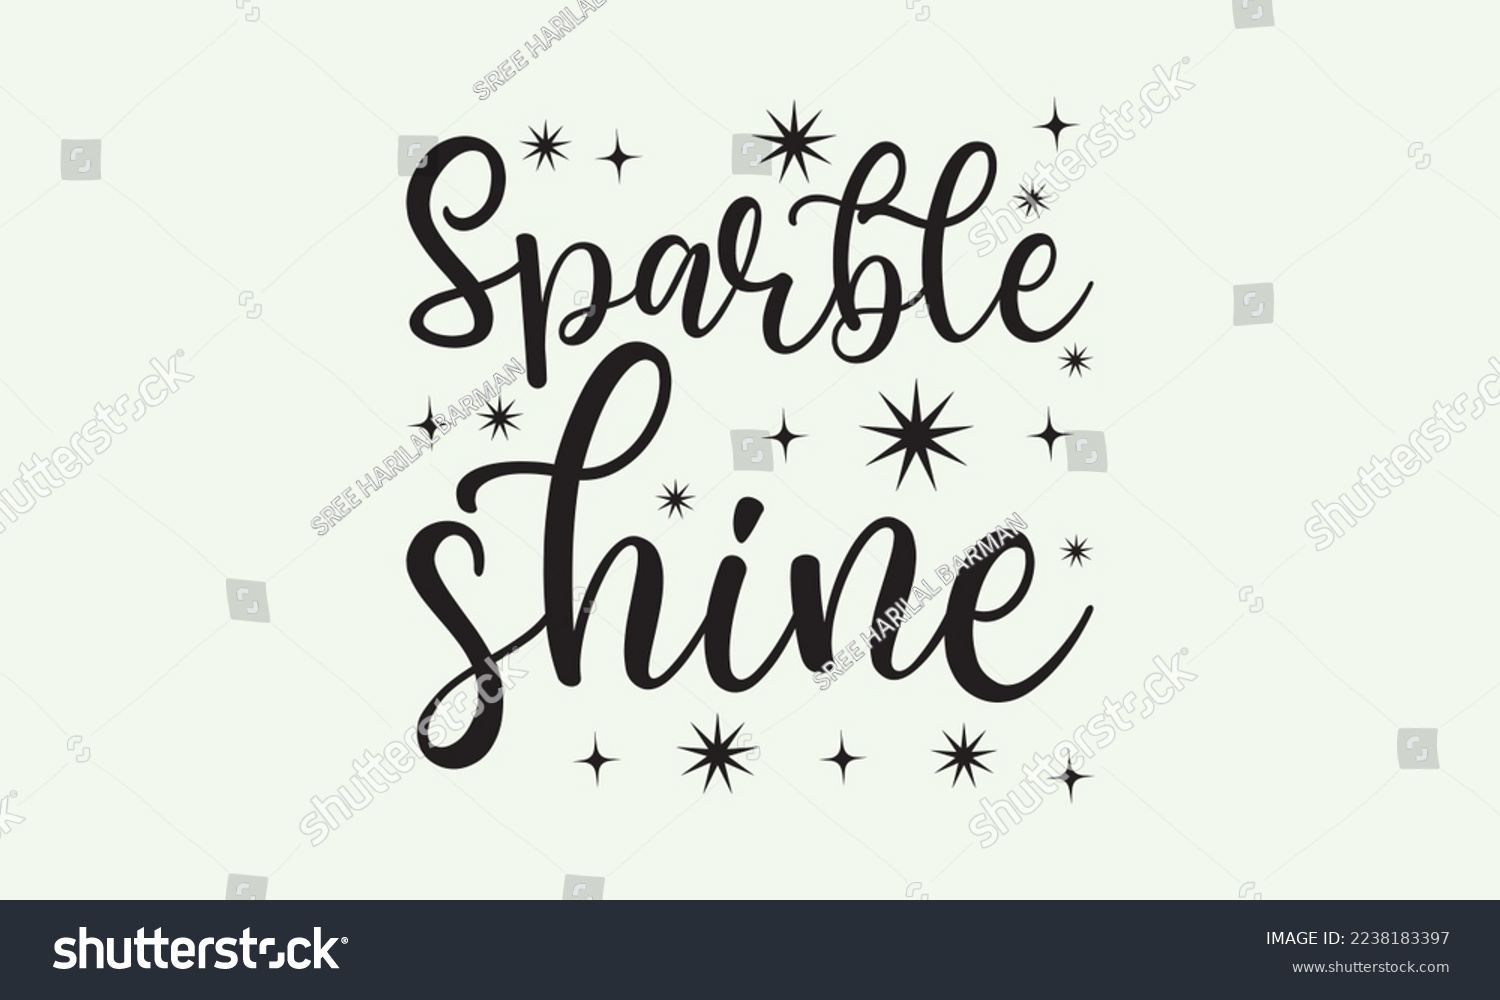 SVG of Sparble shine - President's day T-shirt Design, File Sports SVG Design, Sports typography t-shirt design, For stickers, Templet, mugs, etc. for Cutting, cards, and flyers. svg